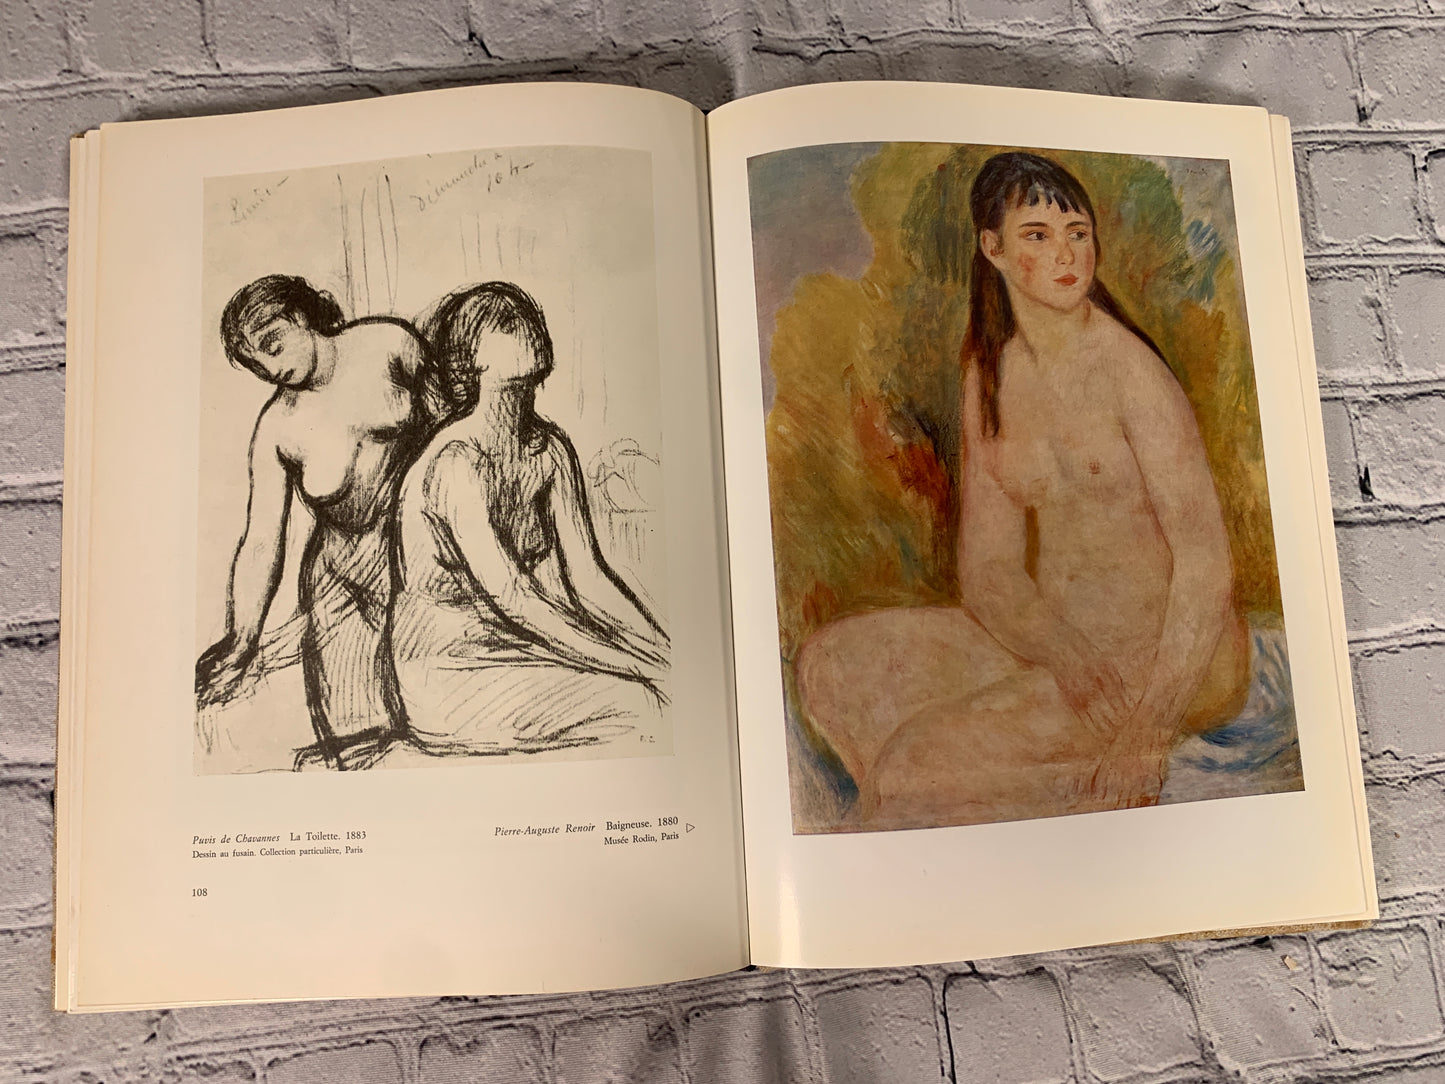 Le Siecle des Impressionnistes (Century of the Impressionists) by Raymond Cogniat [1967]